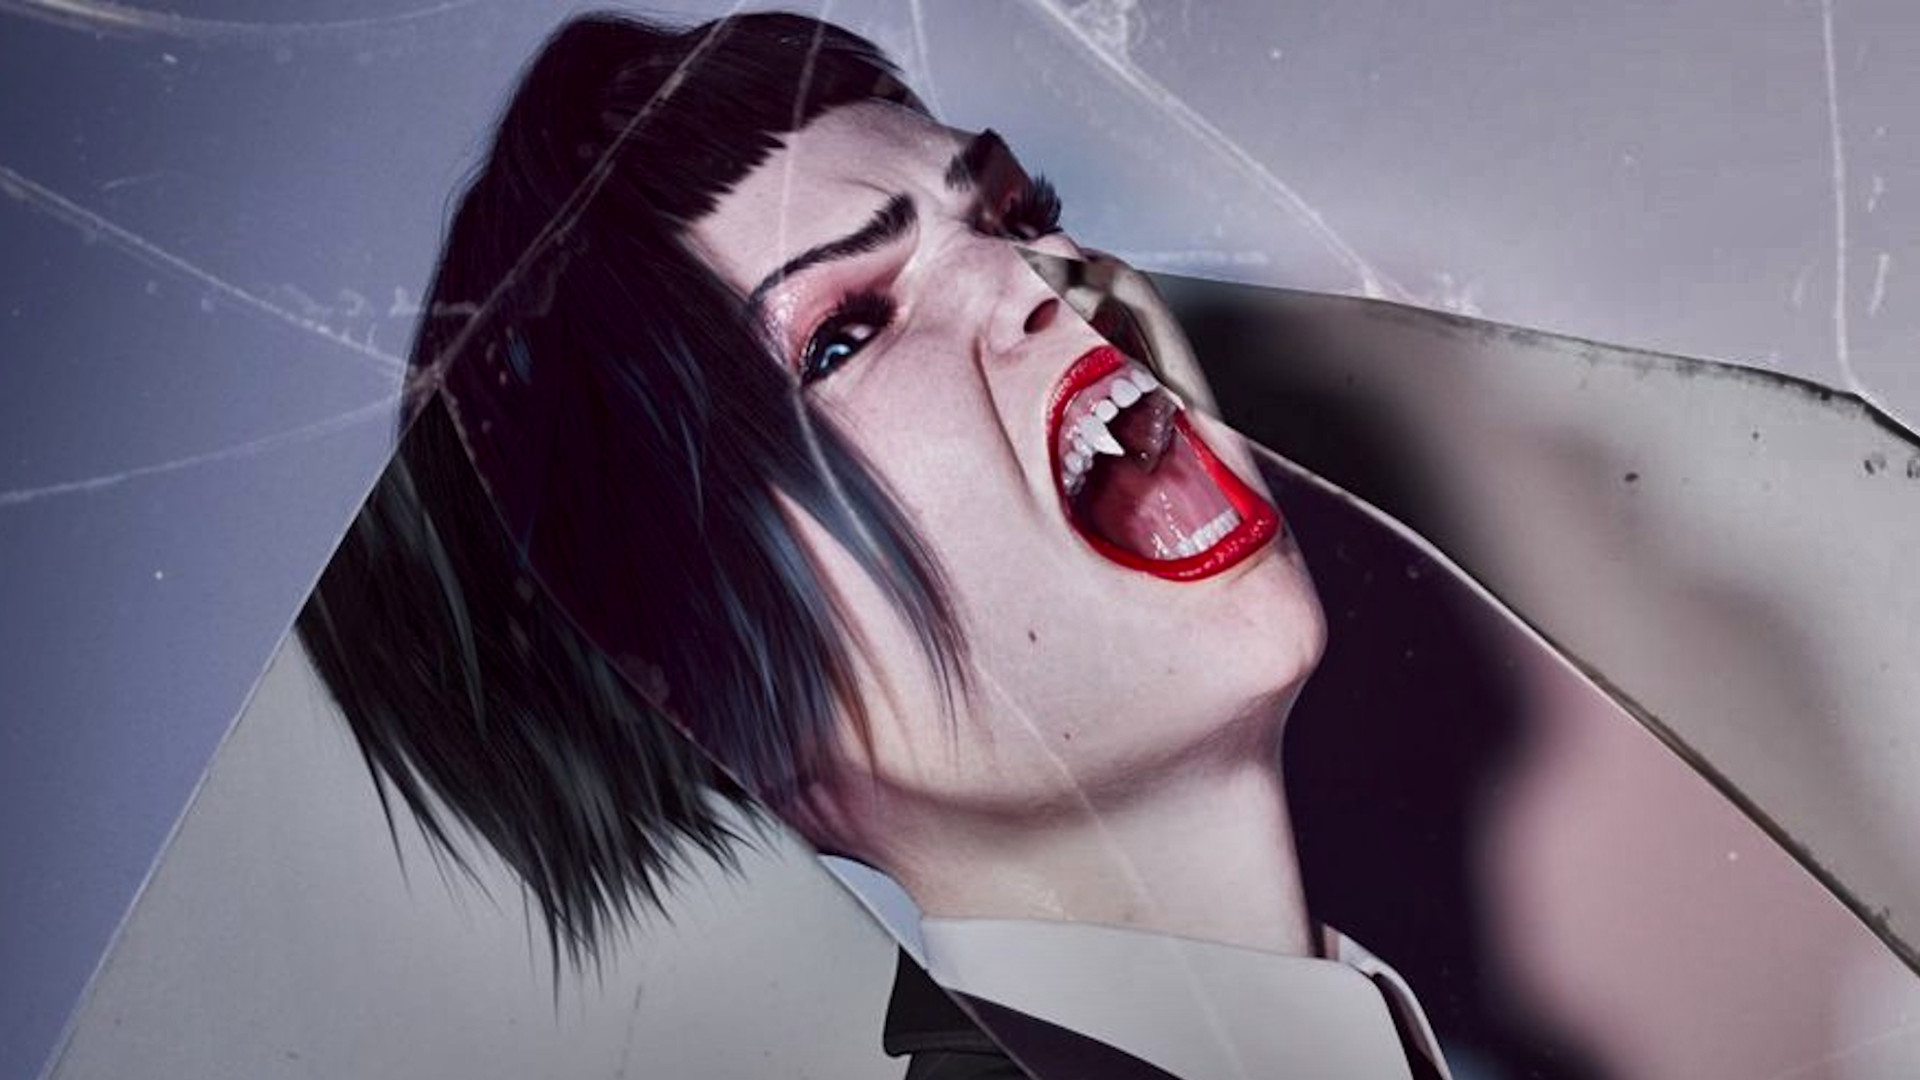 Vampire the Masquerade Swansong review – flair tainted by imperfection